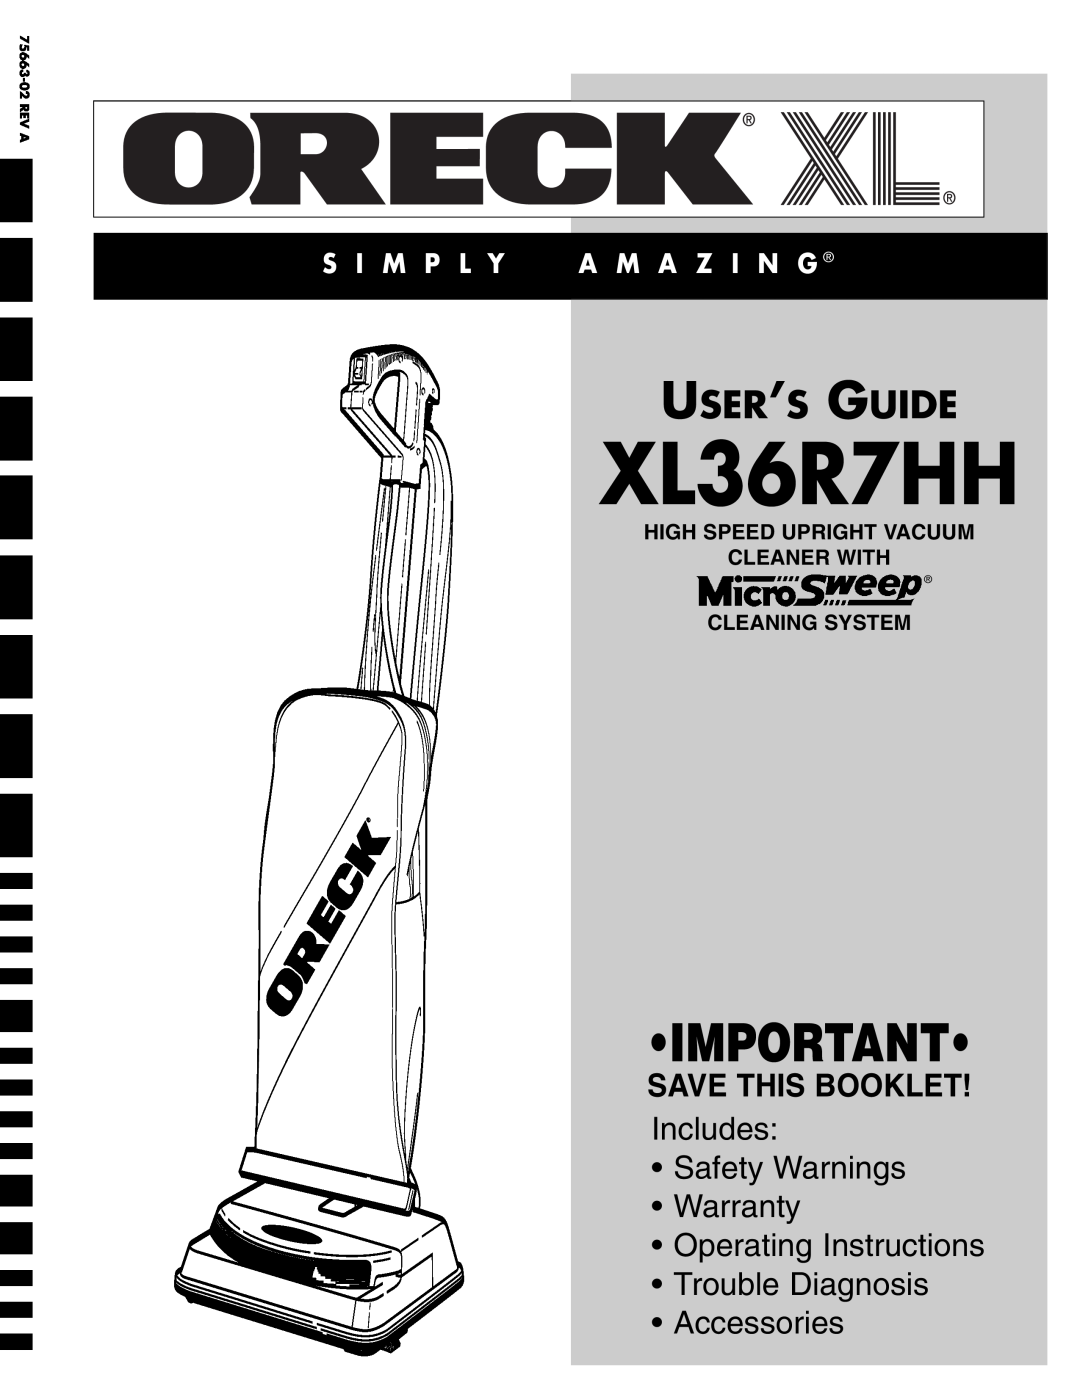 Oreck XL36R7HH warranty High Speed Upright Vacuum Cleaner With, Cleaning System, User’S Guide, Save This Booklet 